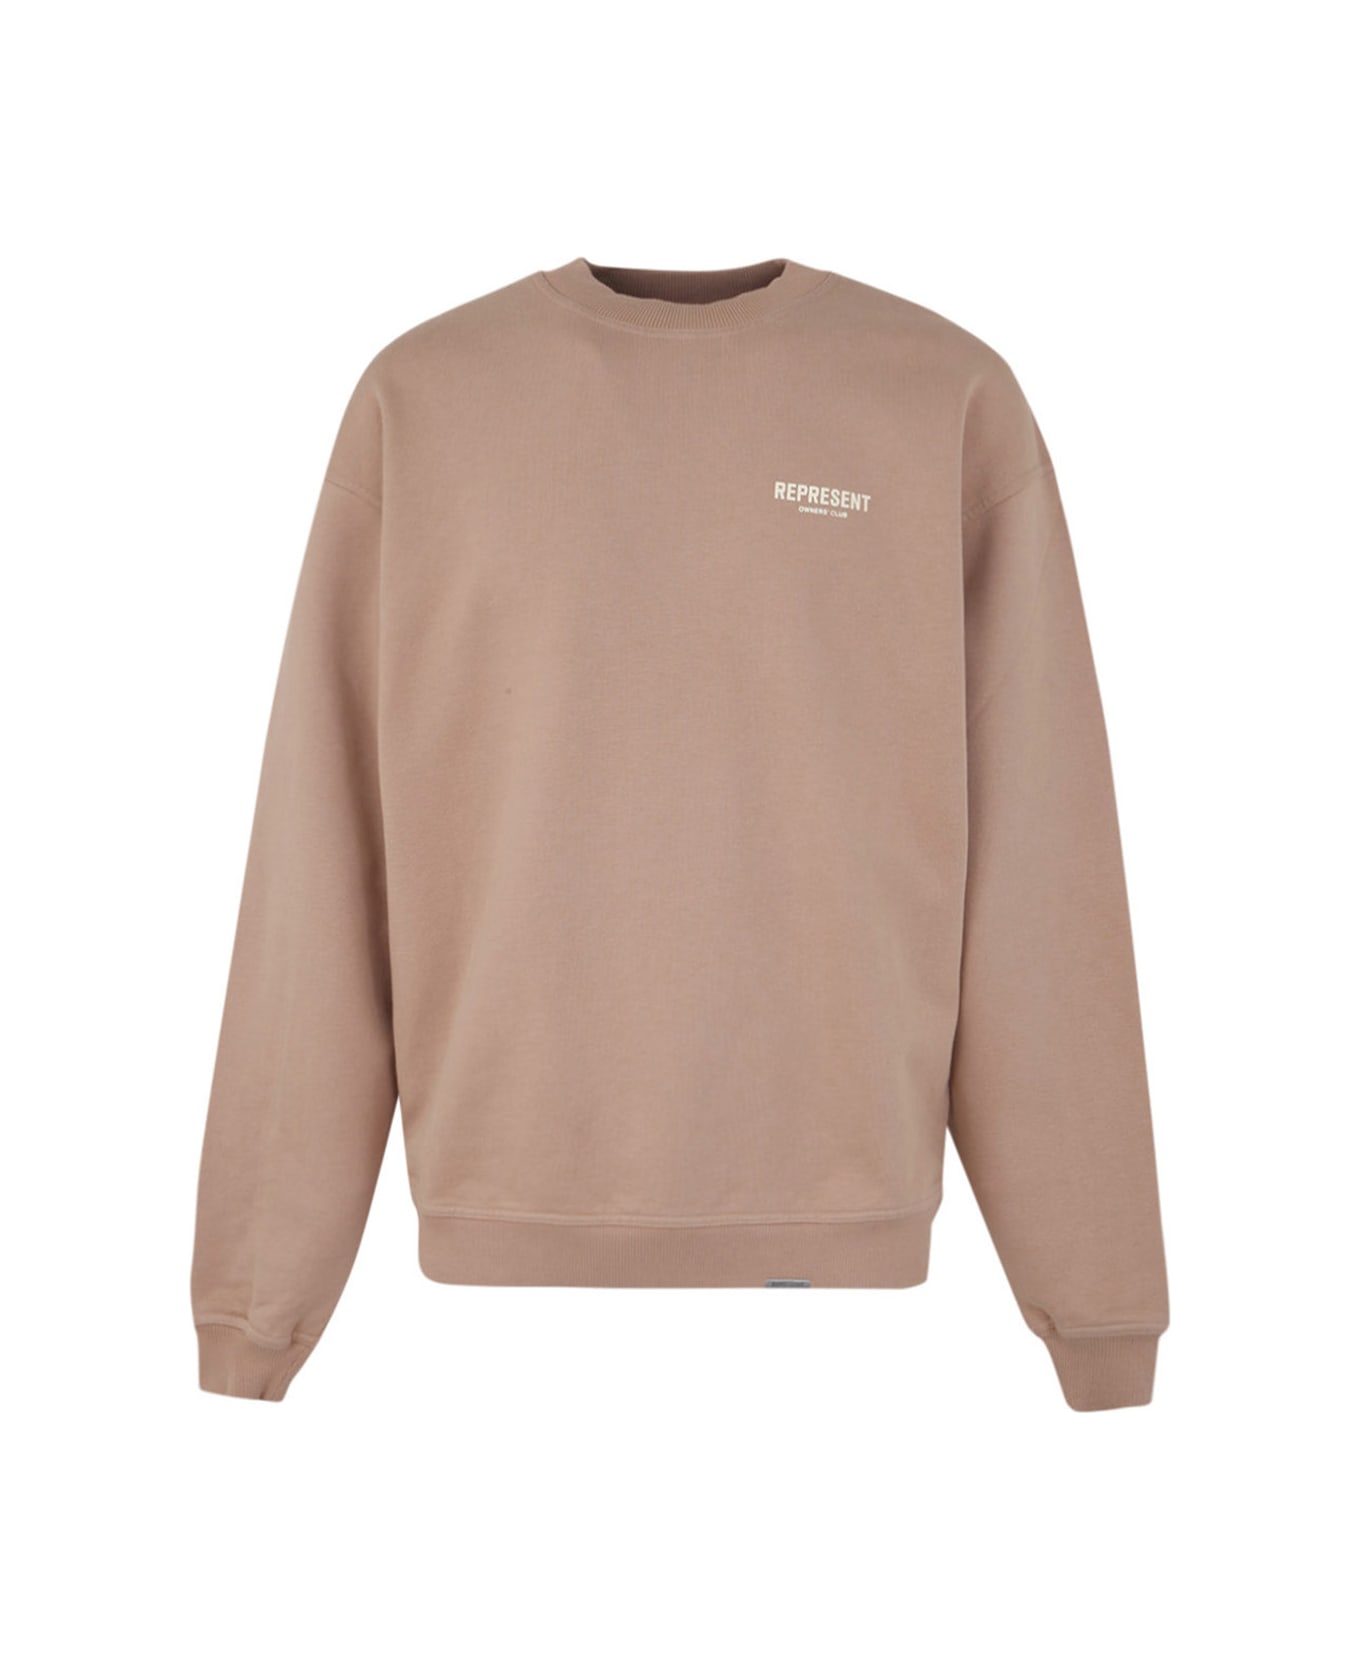 REPRESENT Owners Club Sweater - Stucco